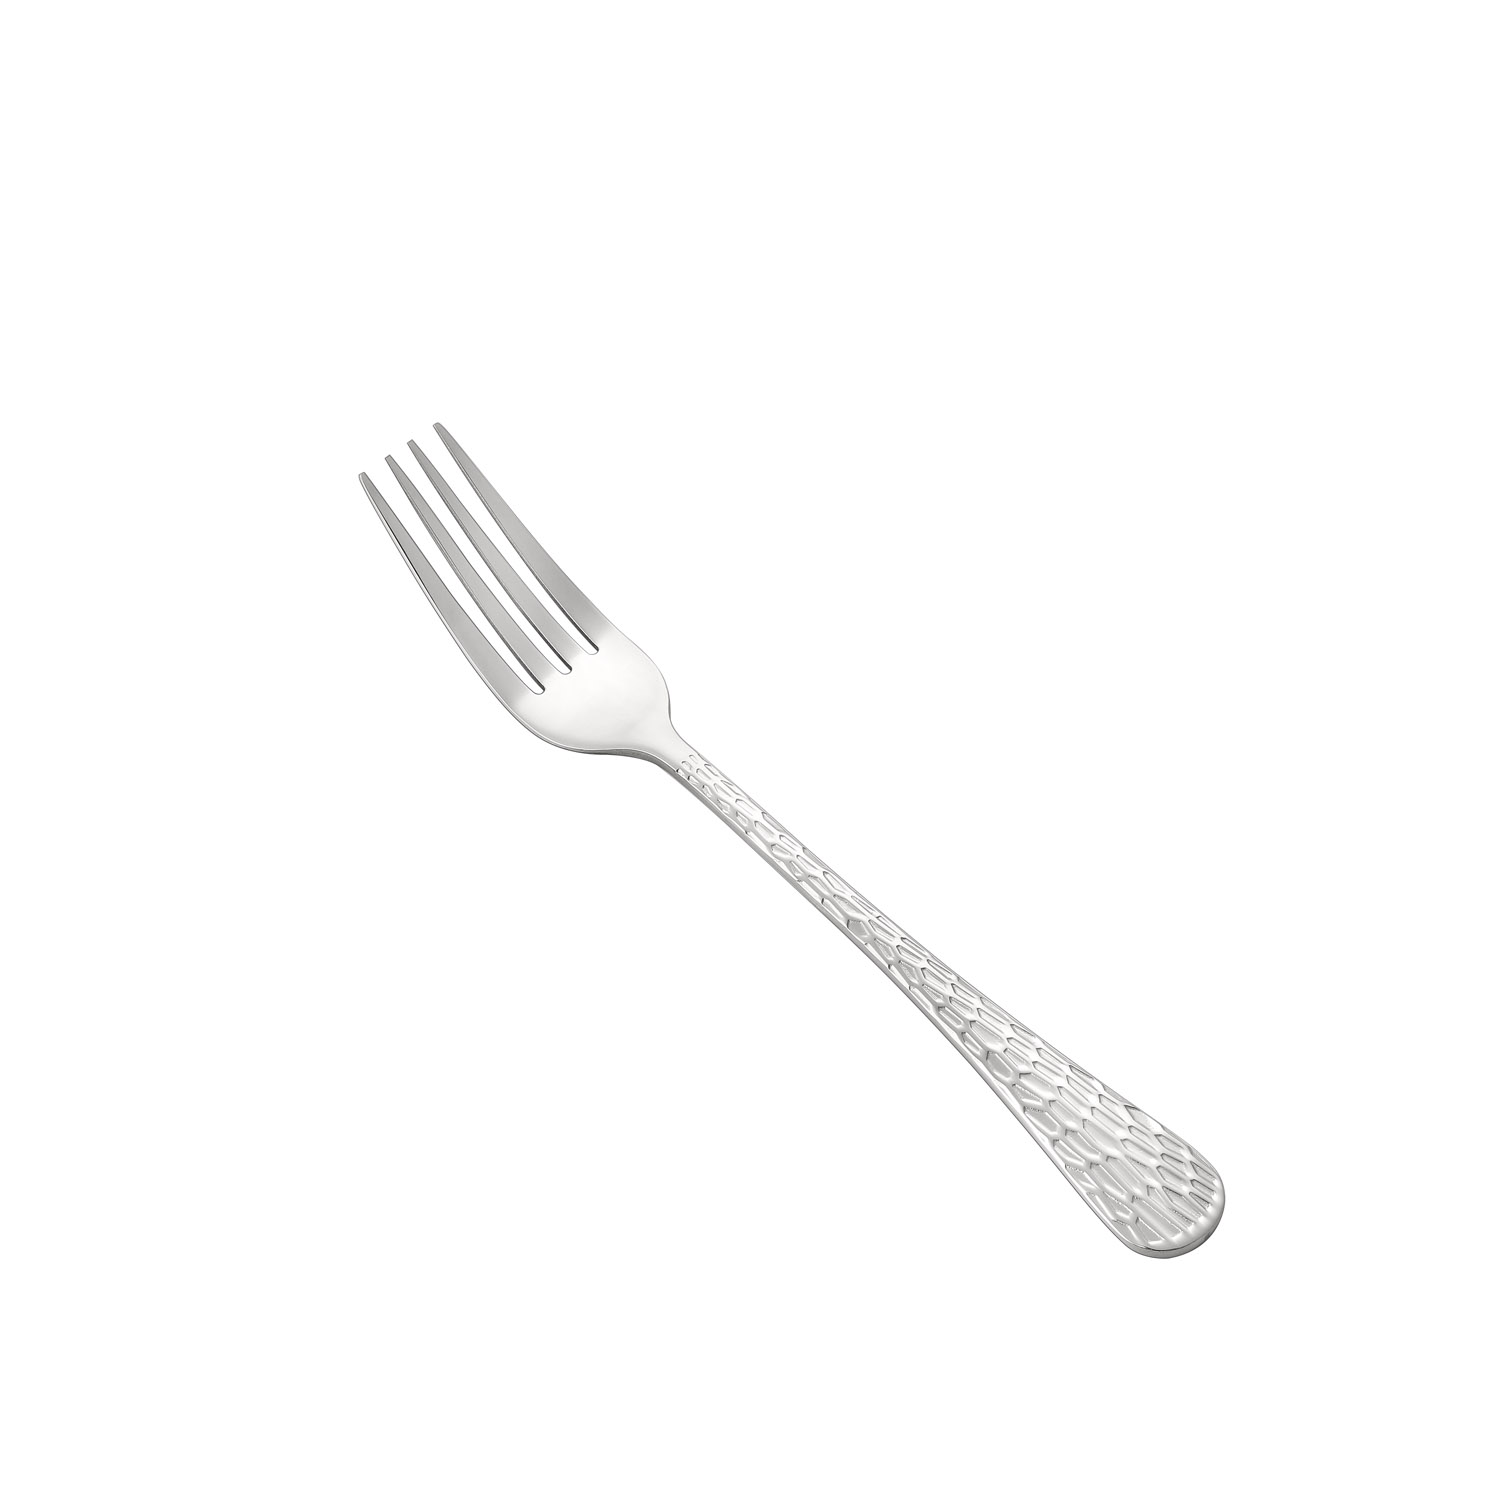 CAC China 3015-11 Celtic Table Fork, Heavyweight 18/0, 8-1/2"